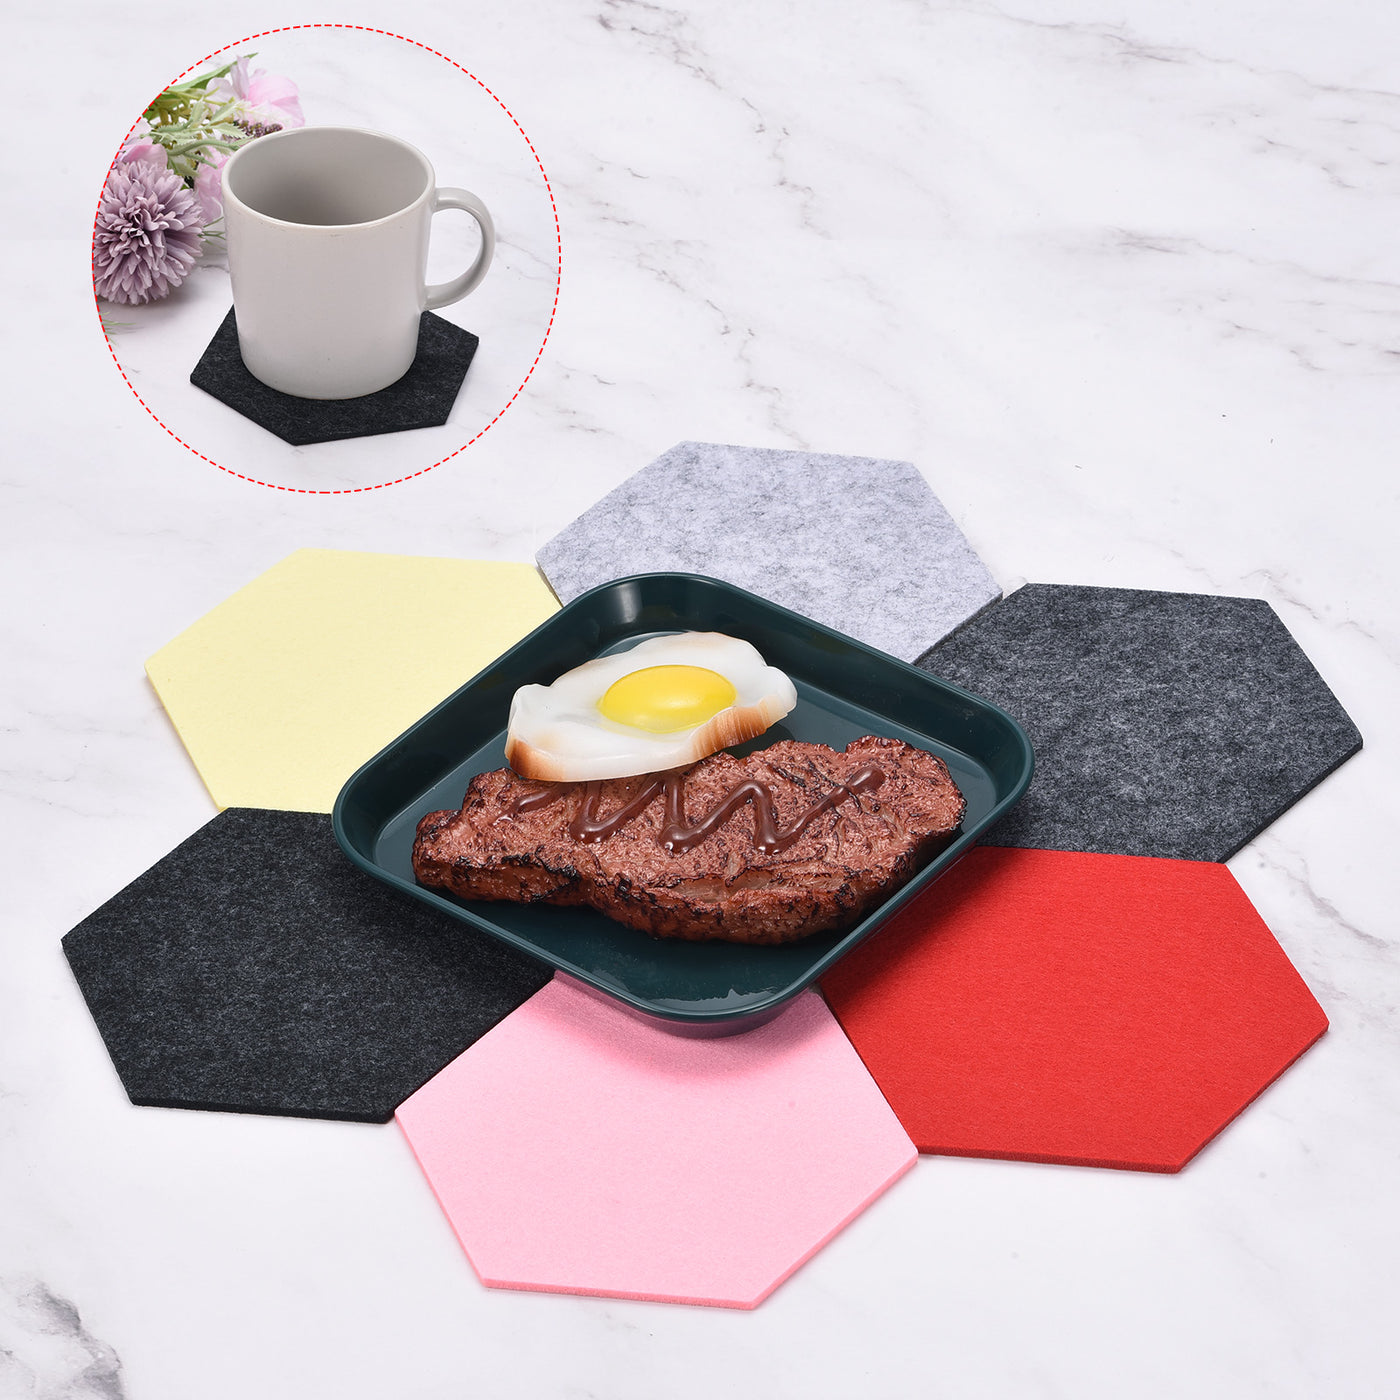 uxcell Uxcell Felt Coasters 9pcs Absorbent Pad Coaster for Drink Cup Pot Bowl Vase Dark Grey